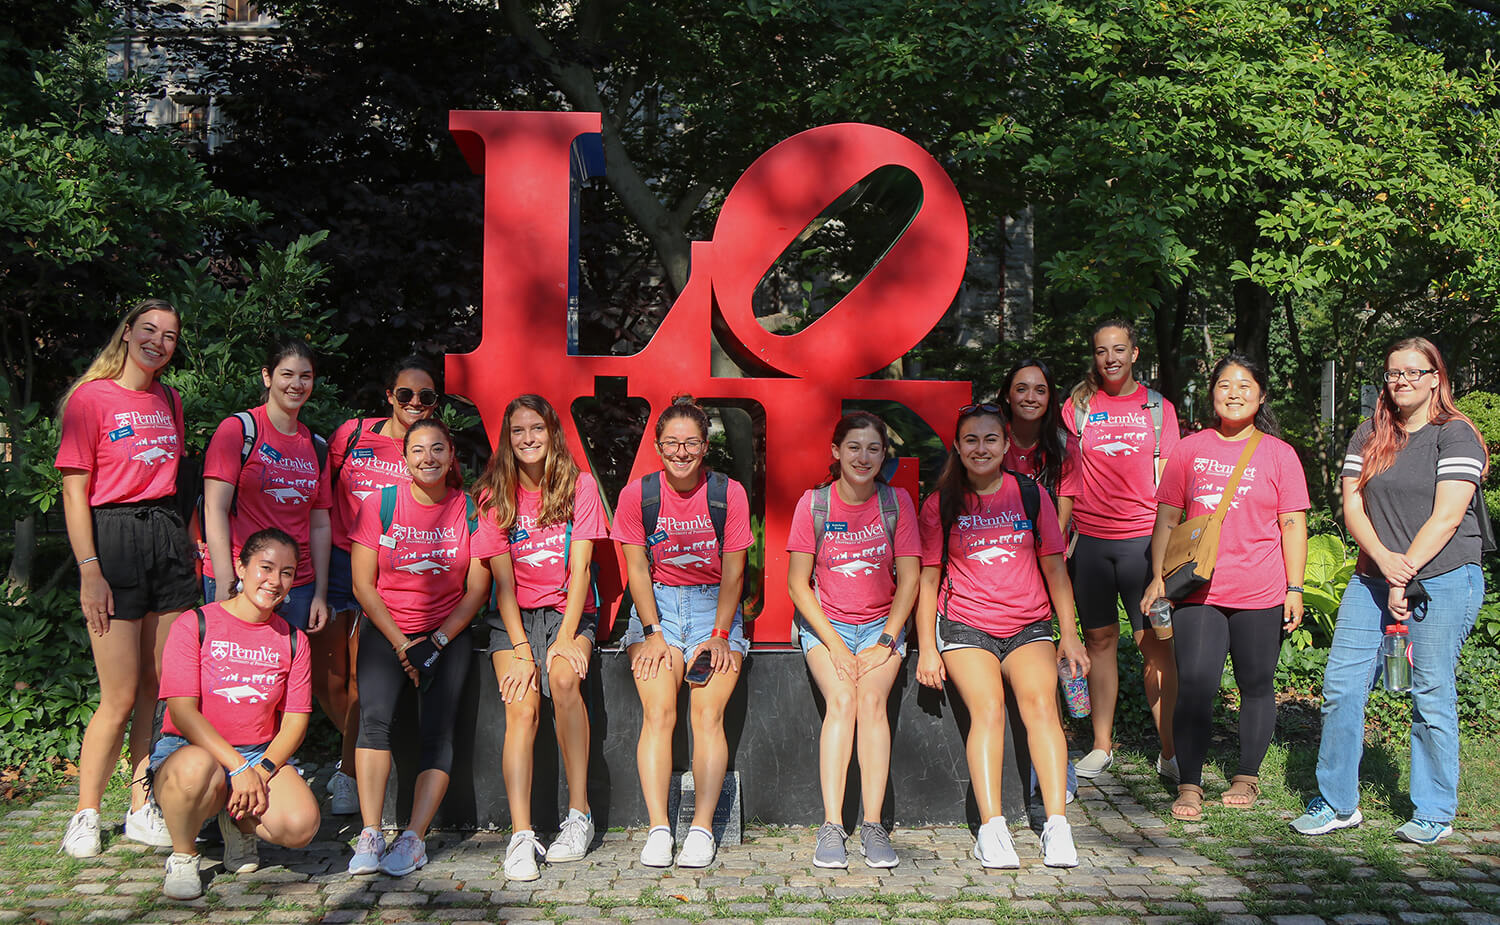 Members of V'25 visit the LOVE sculpture during their tour of Penn's campus.